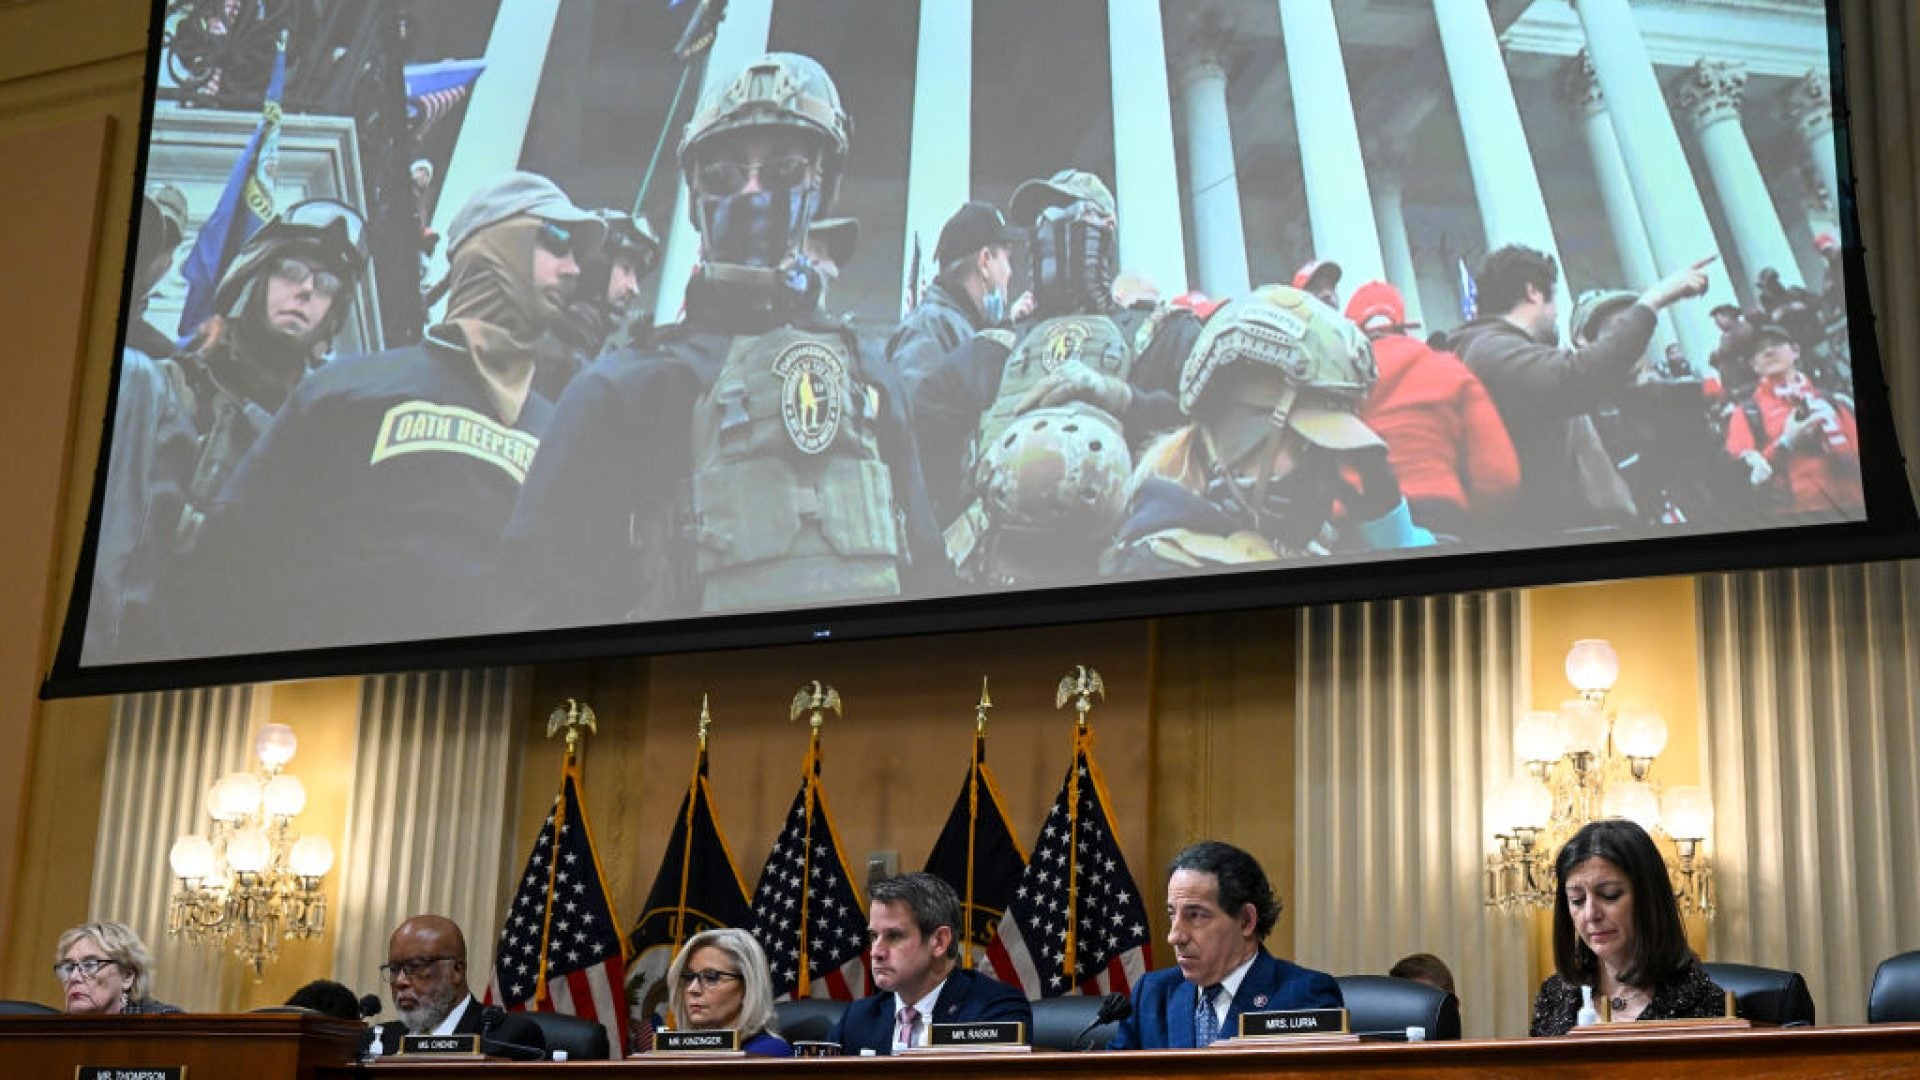 Jan. 6 Committee Recommends Criminal Charges Against Trump For Role In Capitol Attack